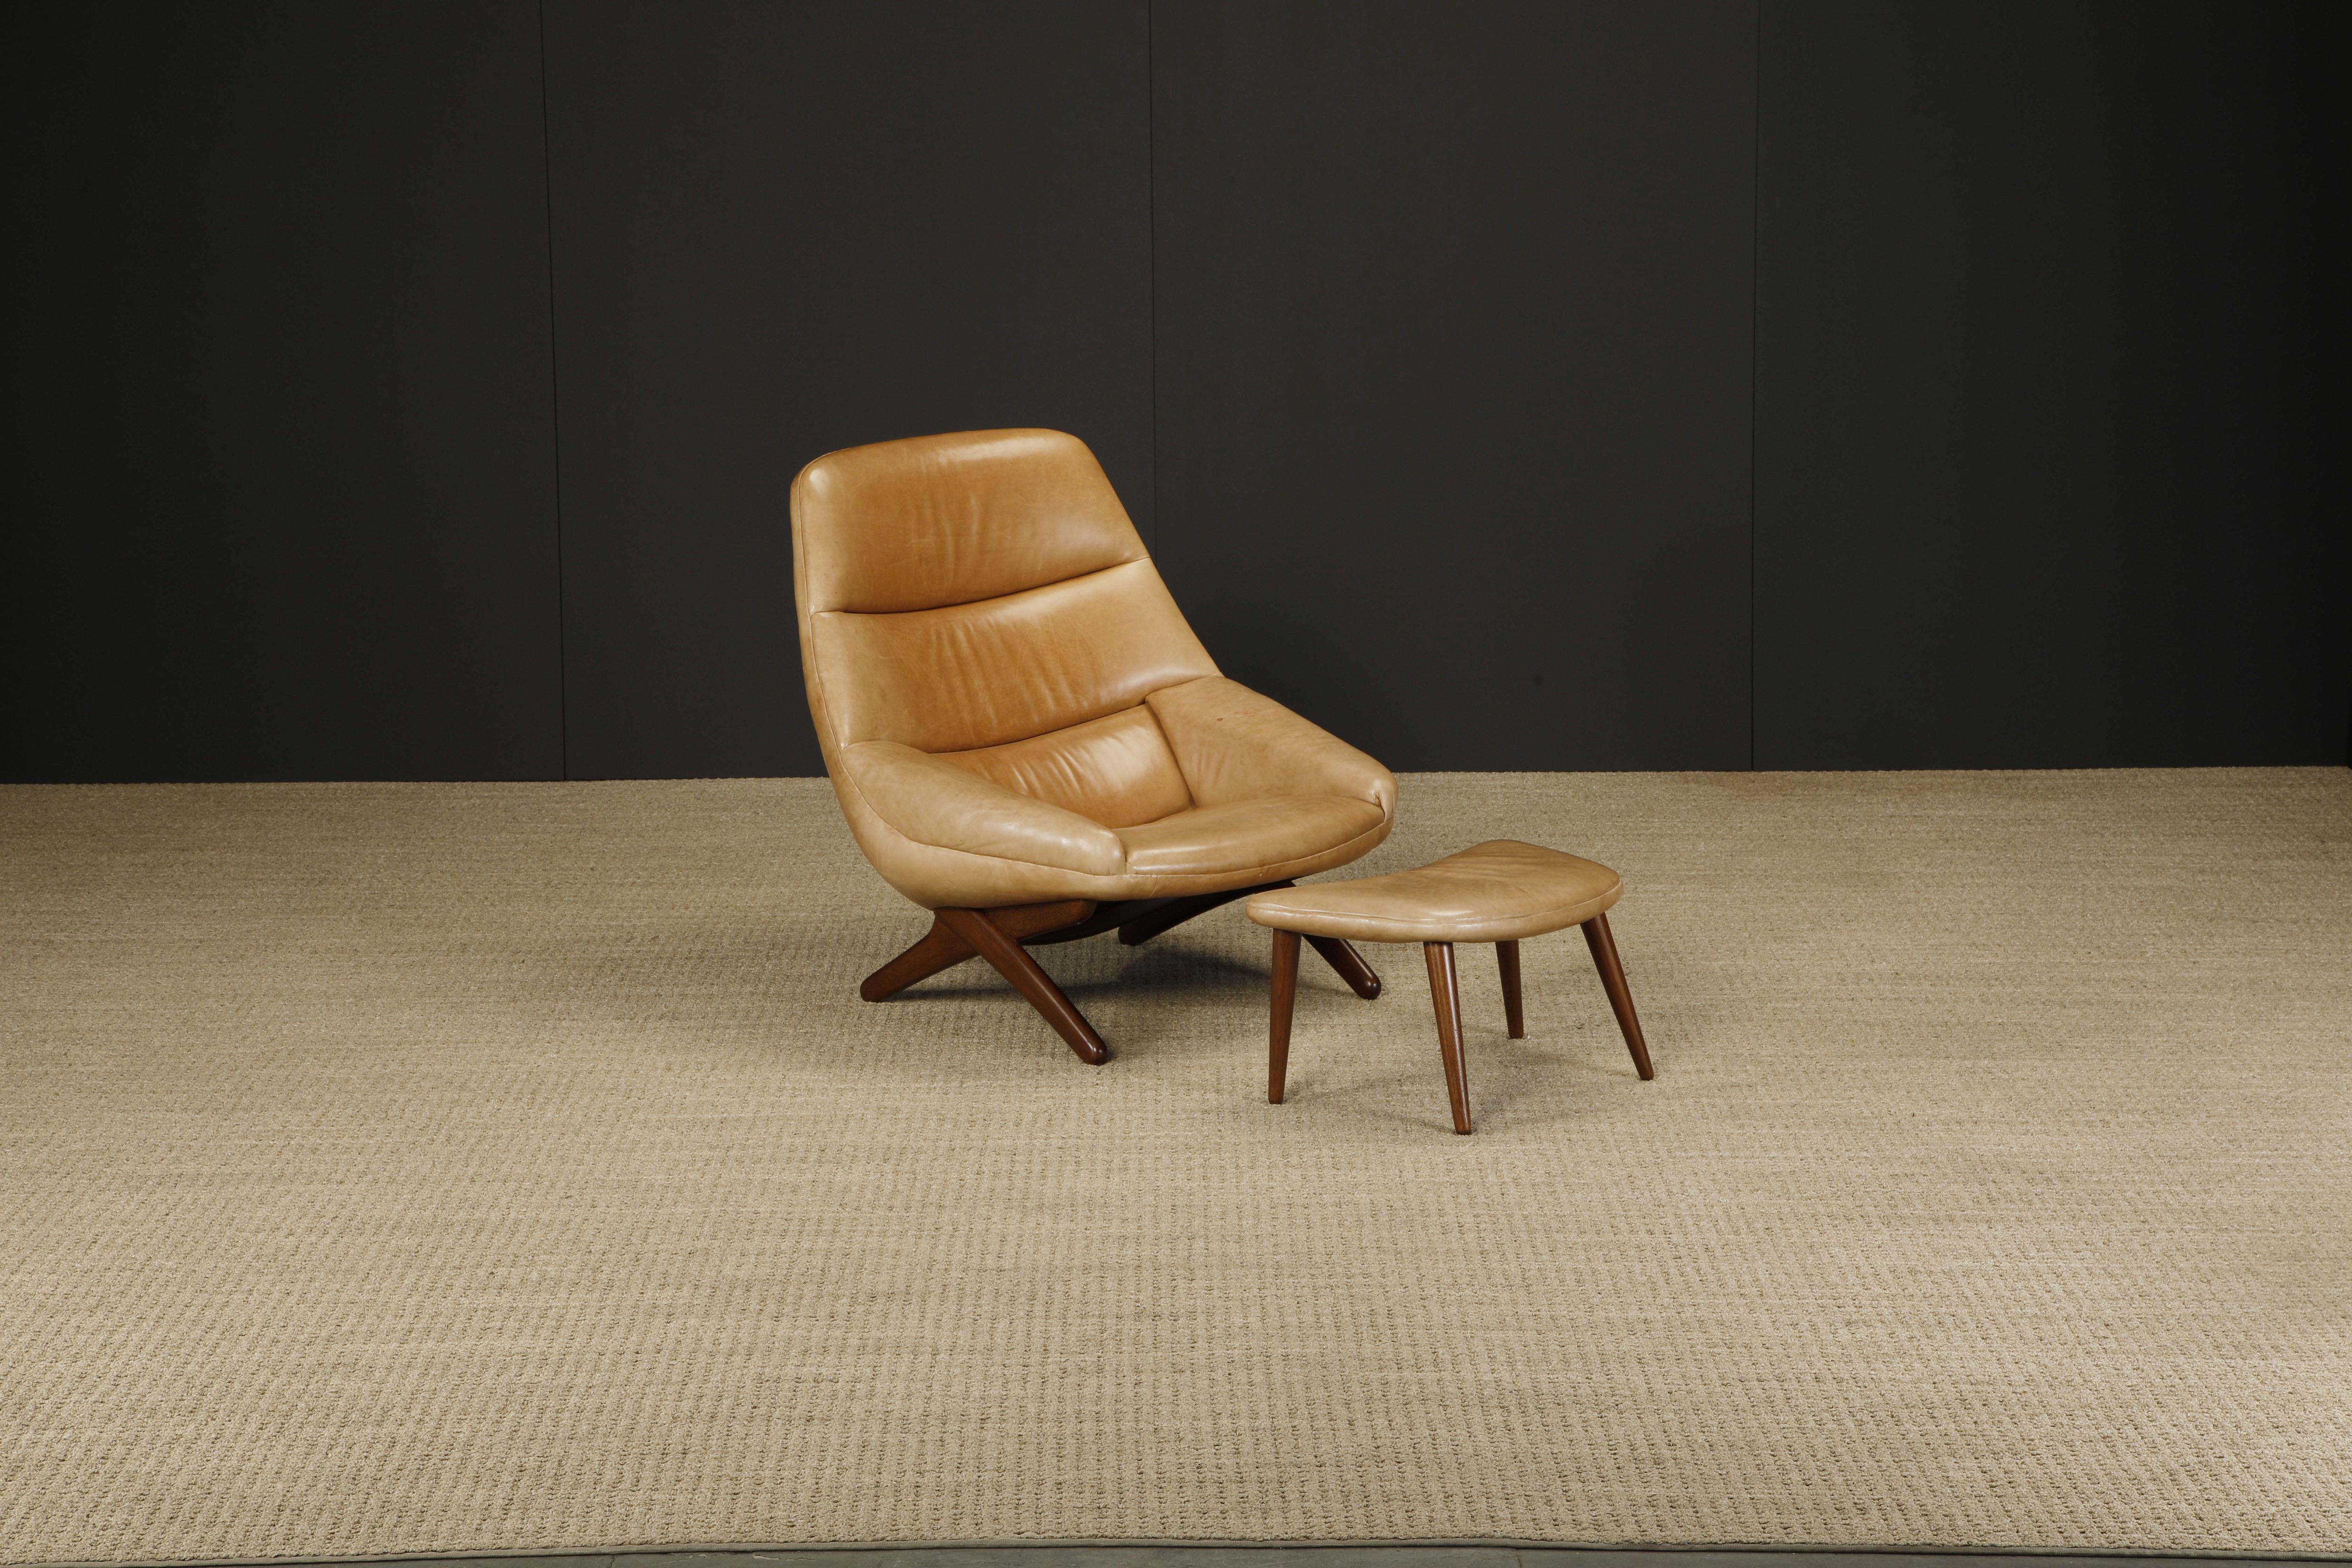 An impressive and sought after 'ML-91' lounge chair and ottoman designed by Illum Wikkelsø and produced by Mikael Laursen, circa 1960 Denmark, featuring a very-comfortable aged leather bucket seat and arms over dark-stained oak legs.  

This model